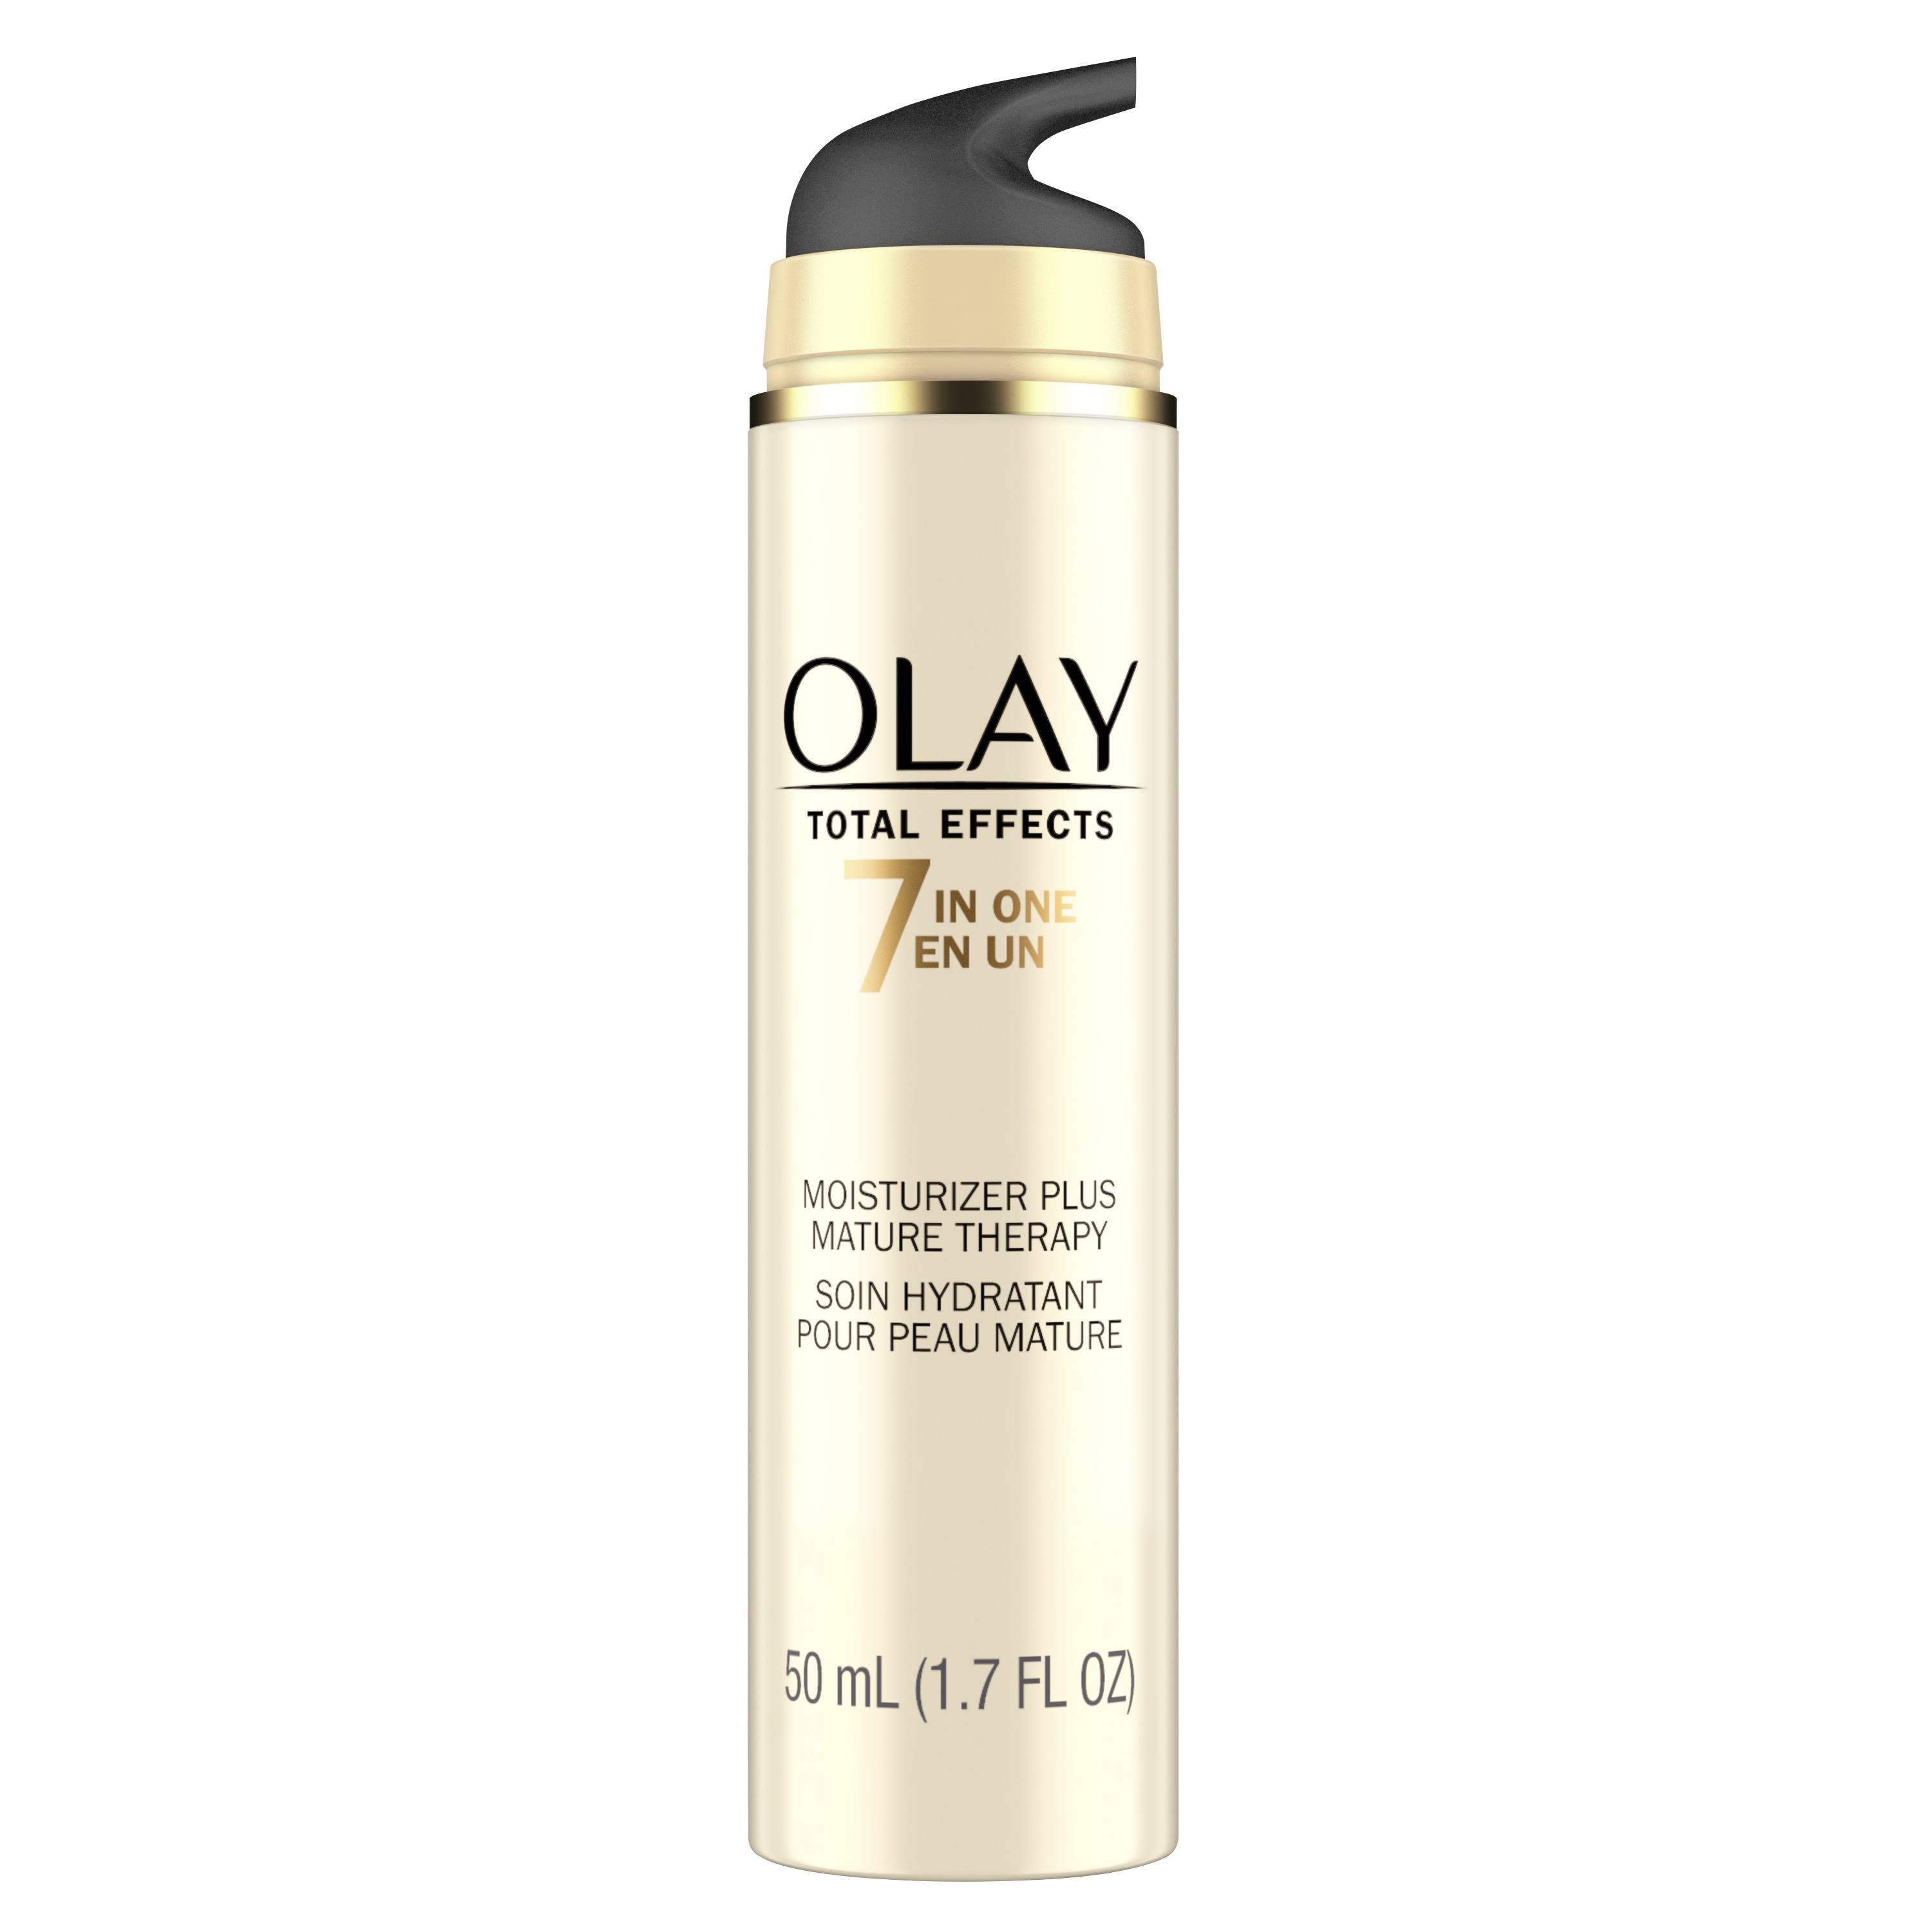 Olay Total Effects 7 In One Moisturizer Plus Mature Therapy - 50ml